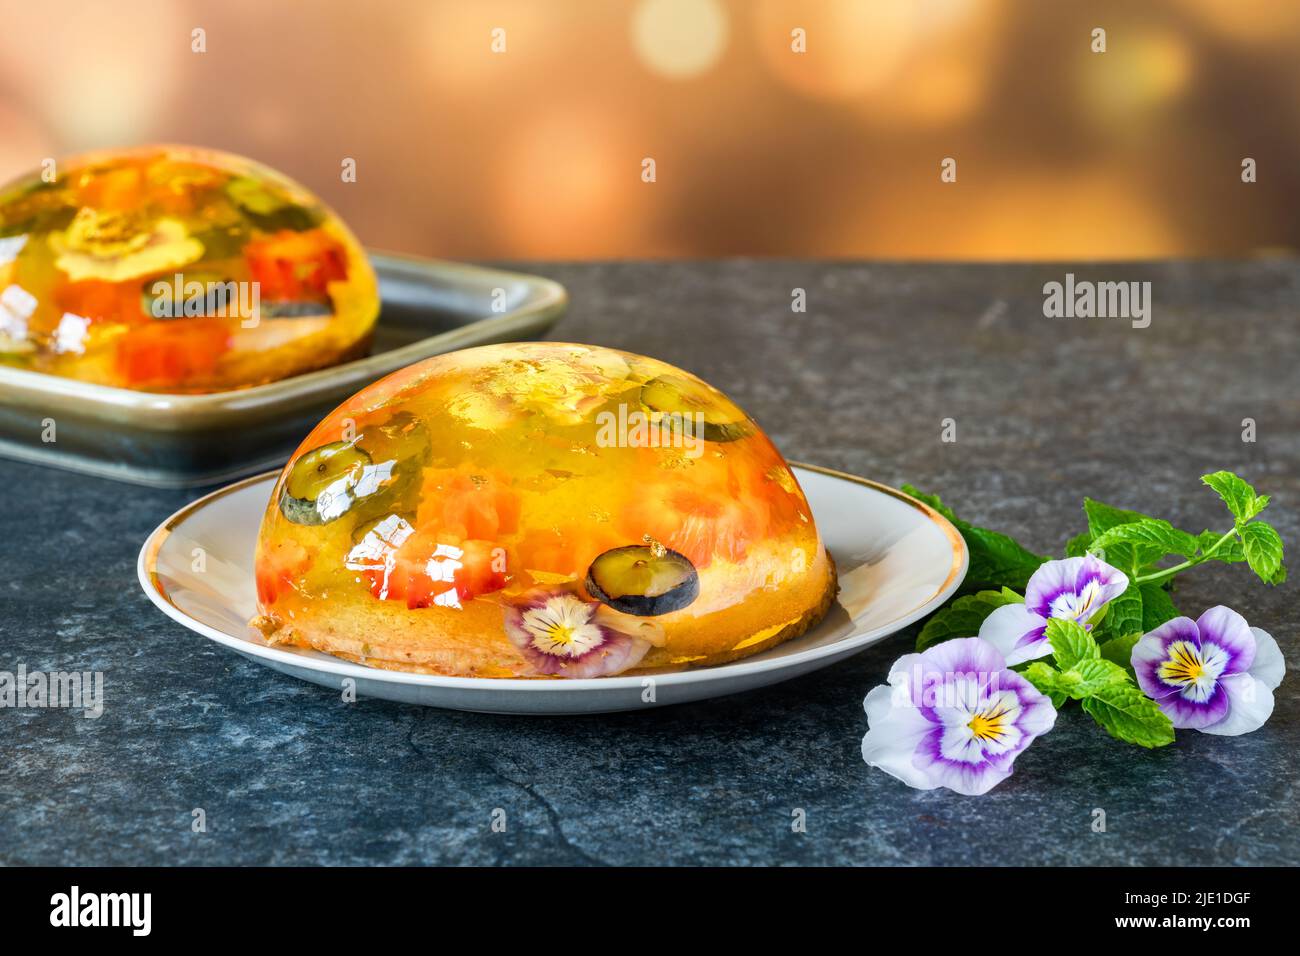 Lemon jelly globes with fresh fruit, edible flowers and gold flakes on pistachio biscuit - gourmet dessert Stock Photo